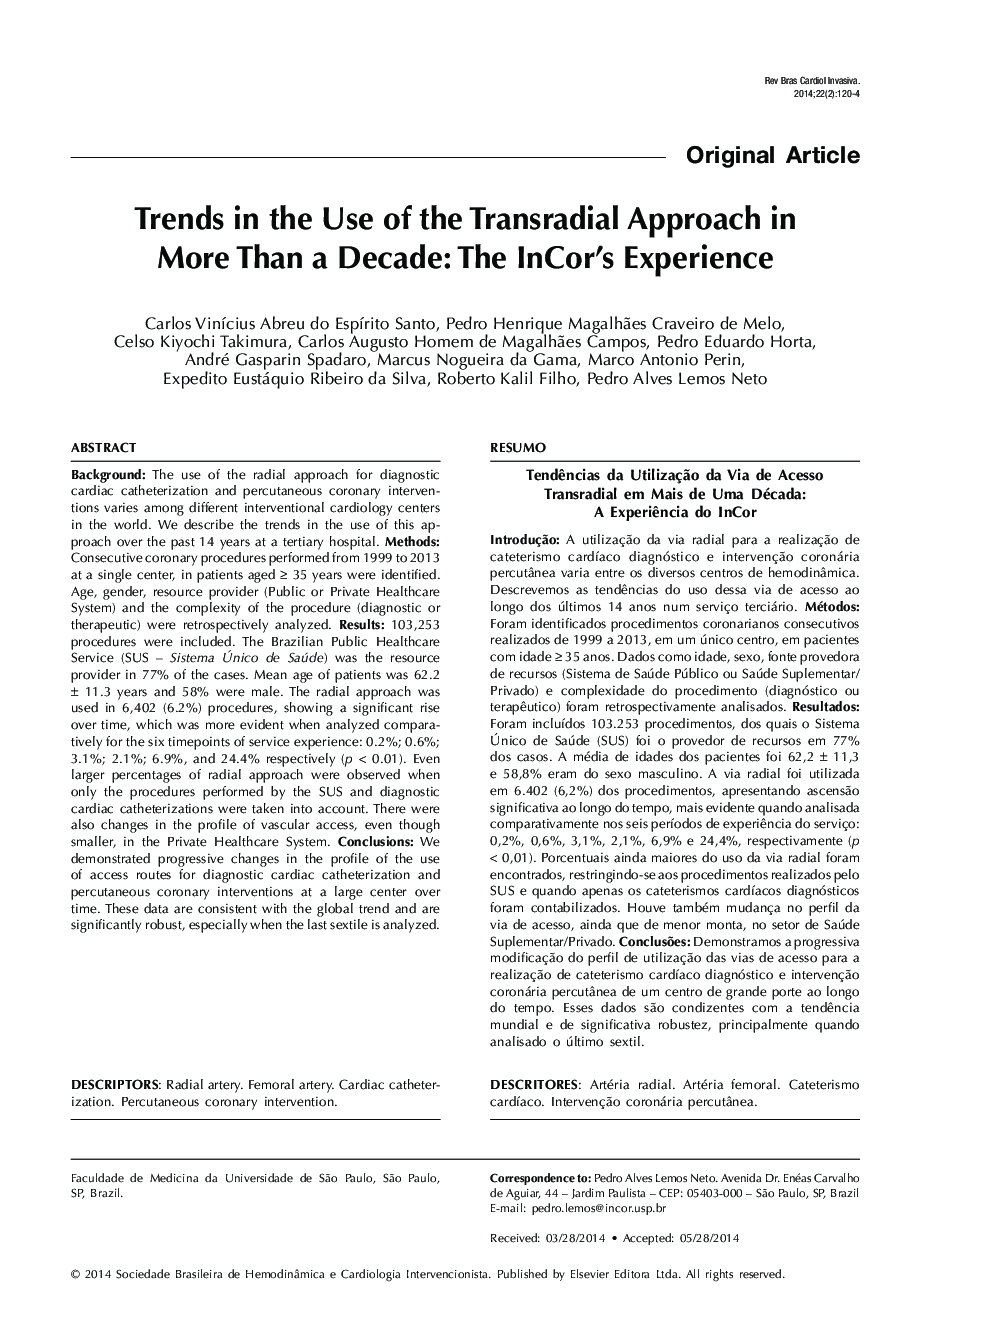 Trends in the Use of the Transradial Approach in More Than a Decade: The InCor’s Experience